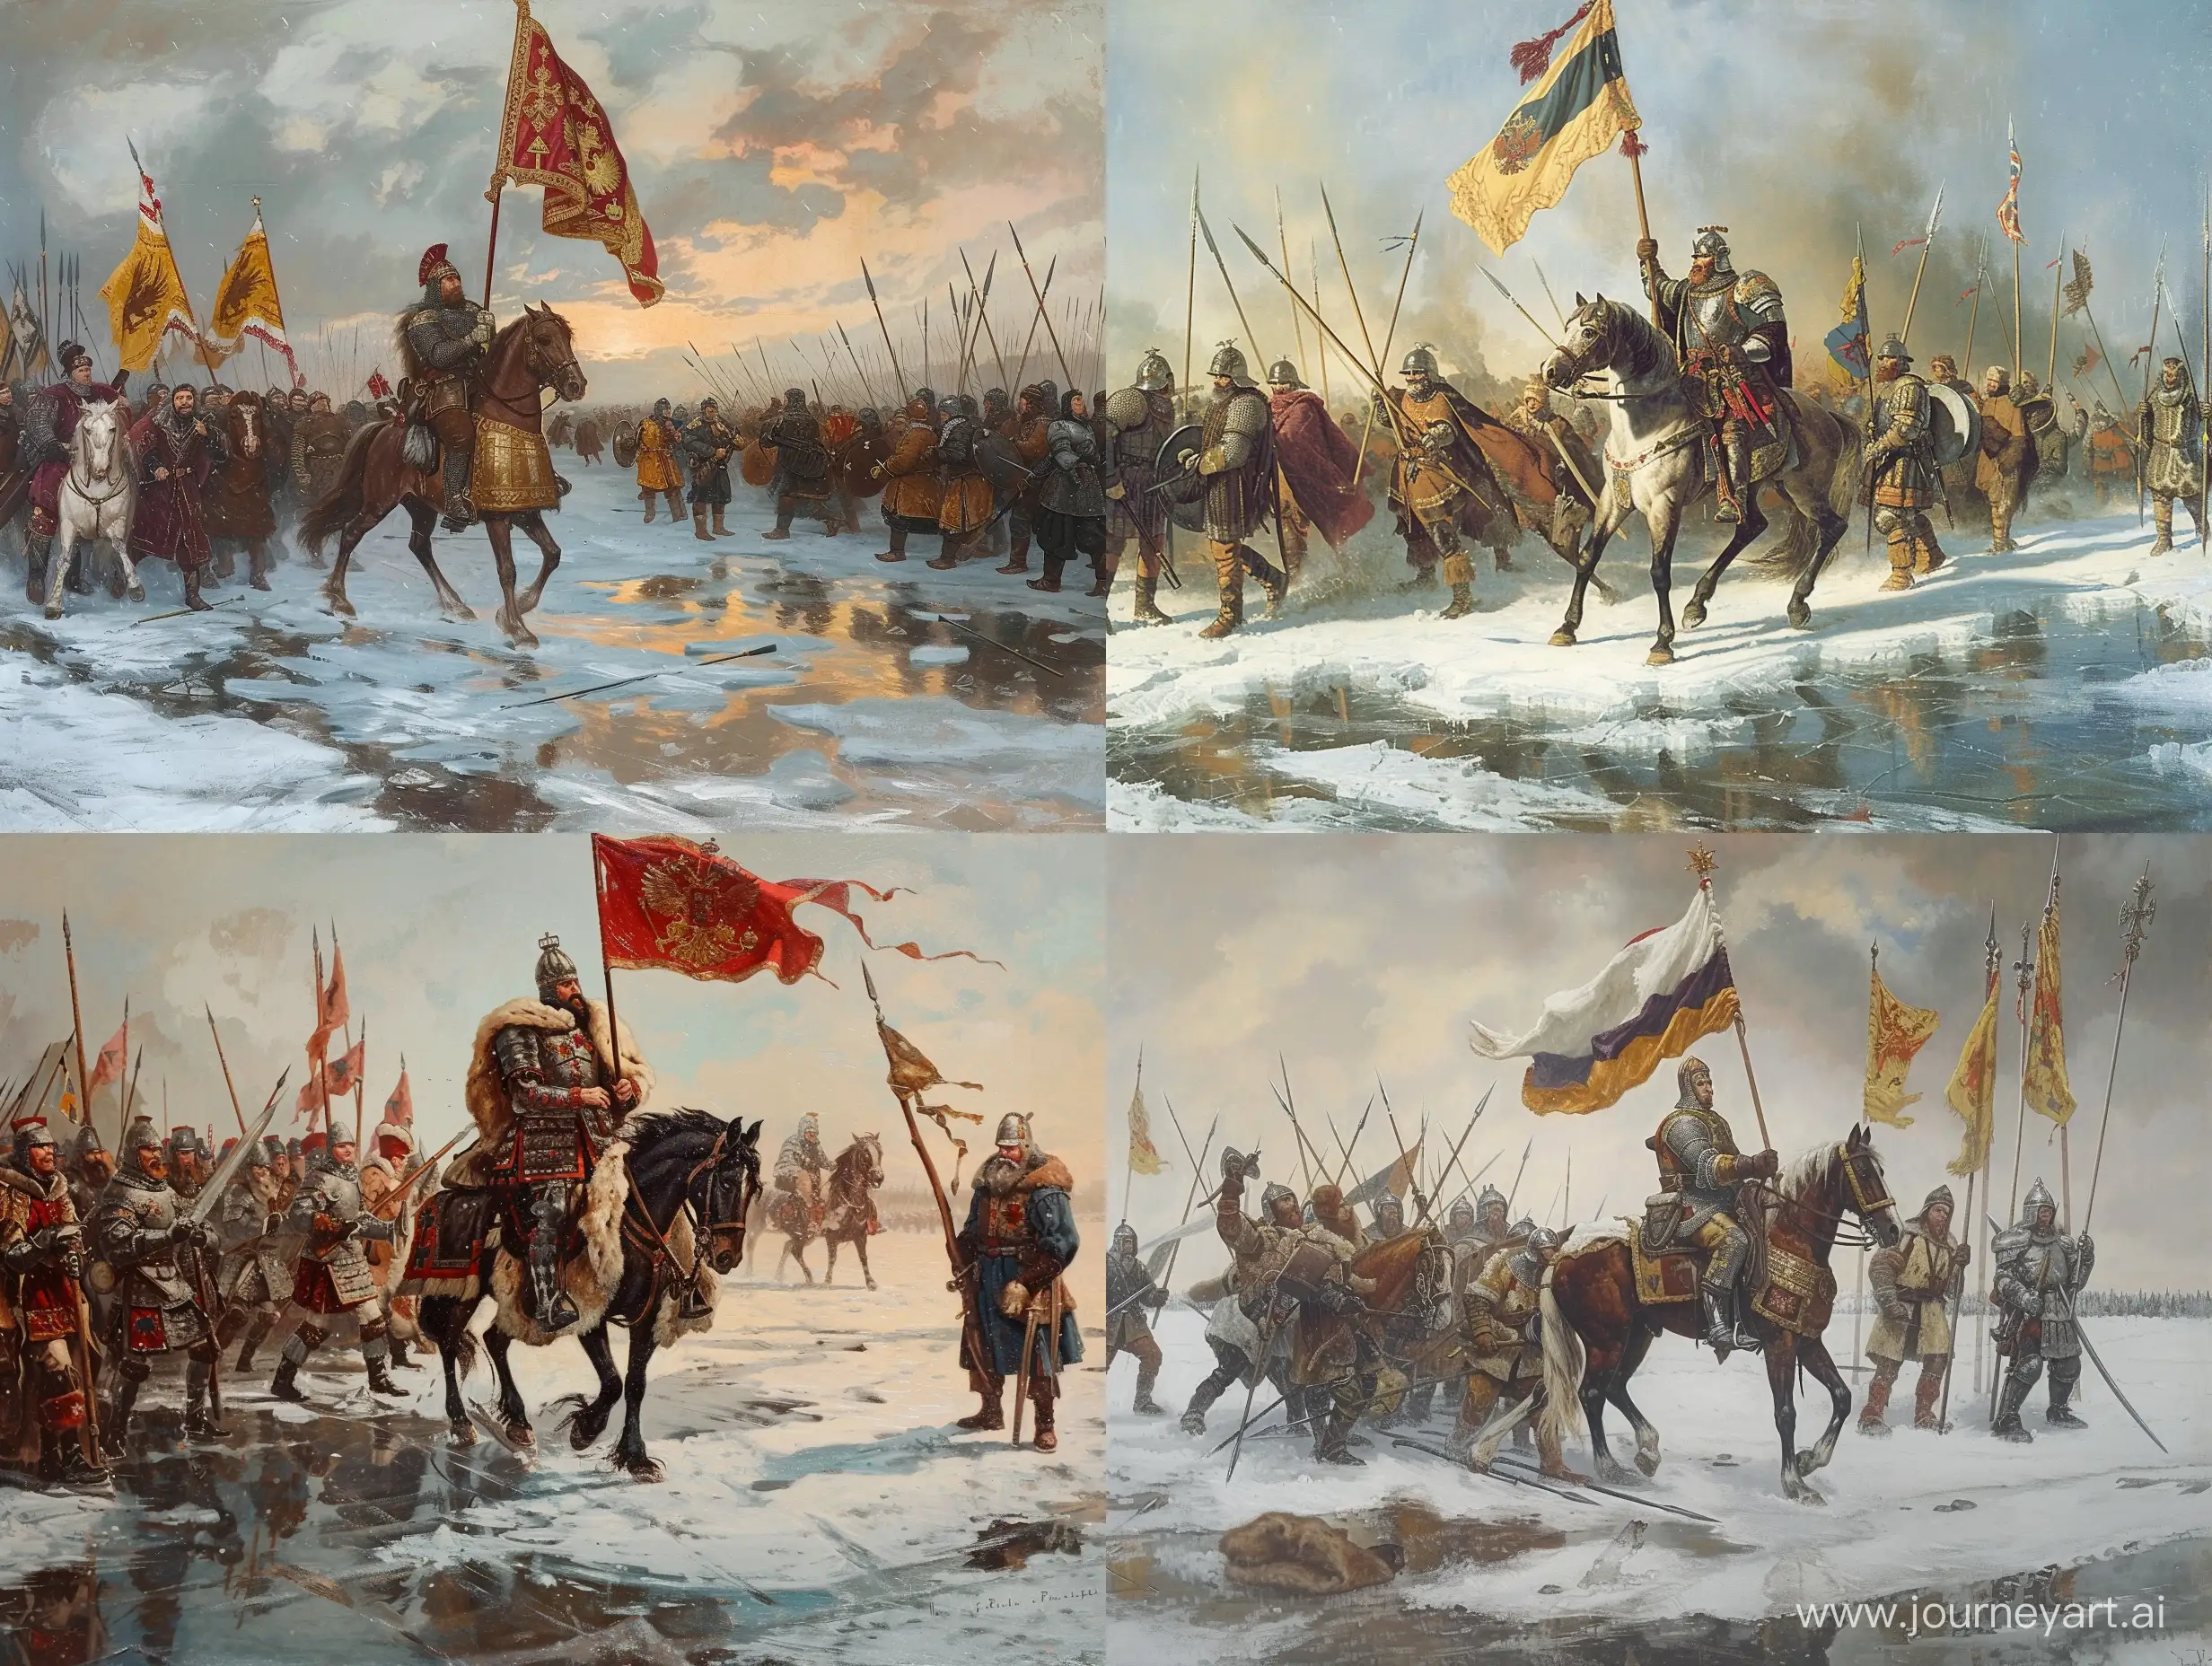 Epic-Battle-on-the-Ice-of-Lake-Peipus-Alexander-Nevsky-Leading-Charge-Against-Swedes